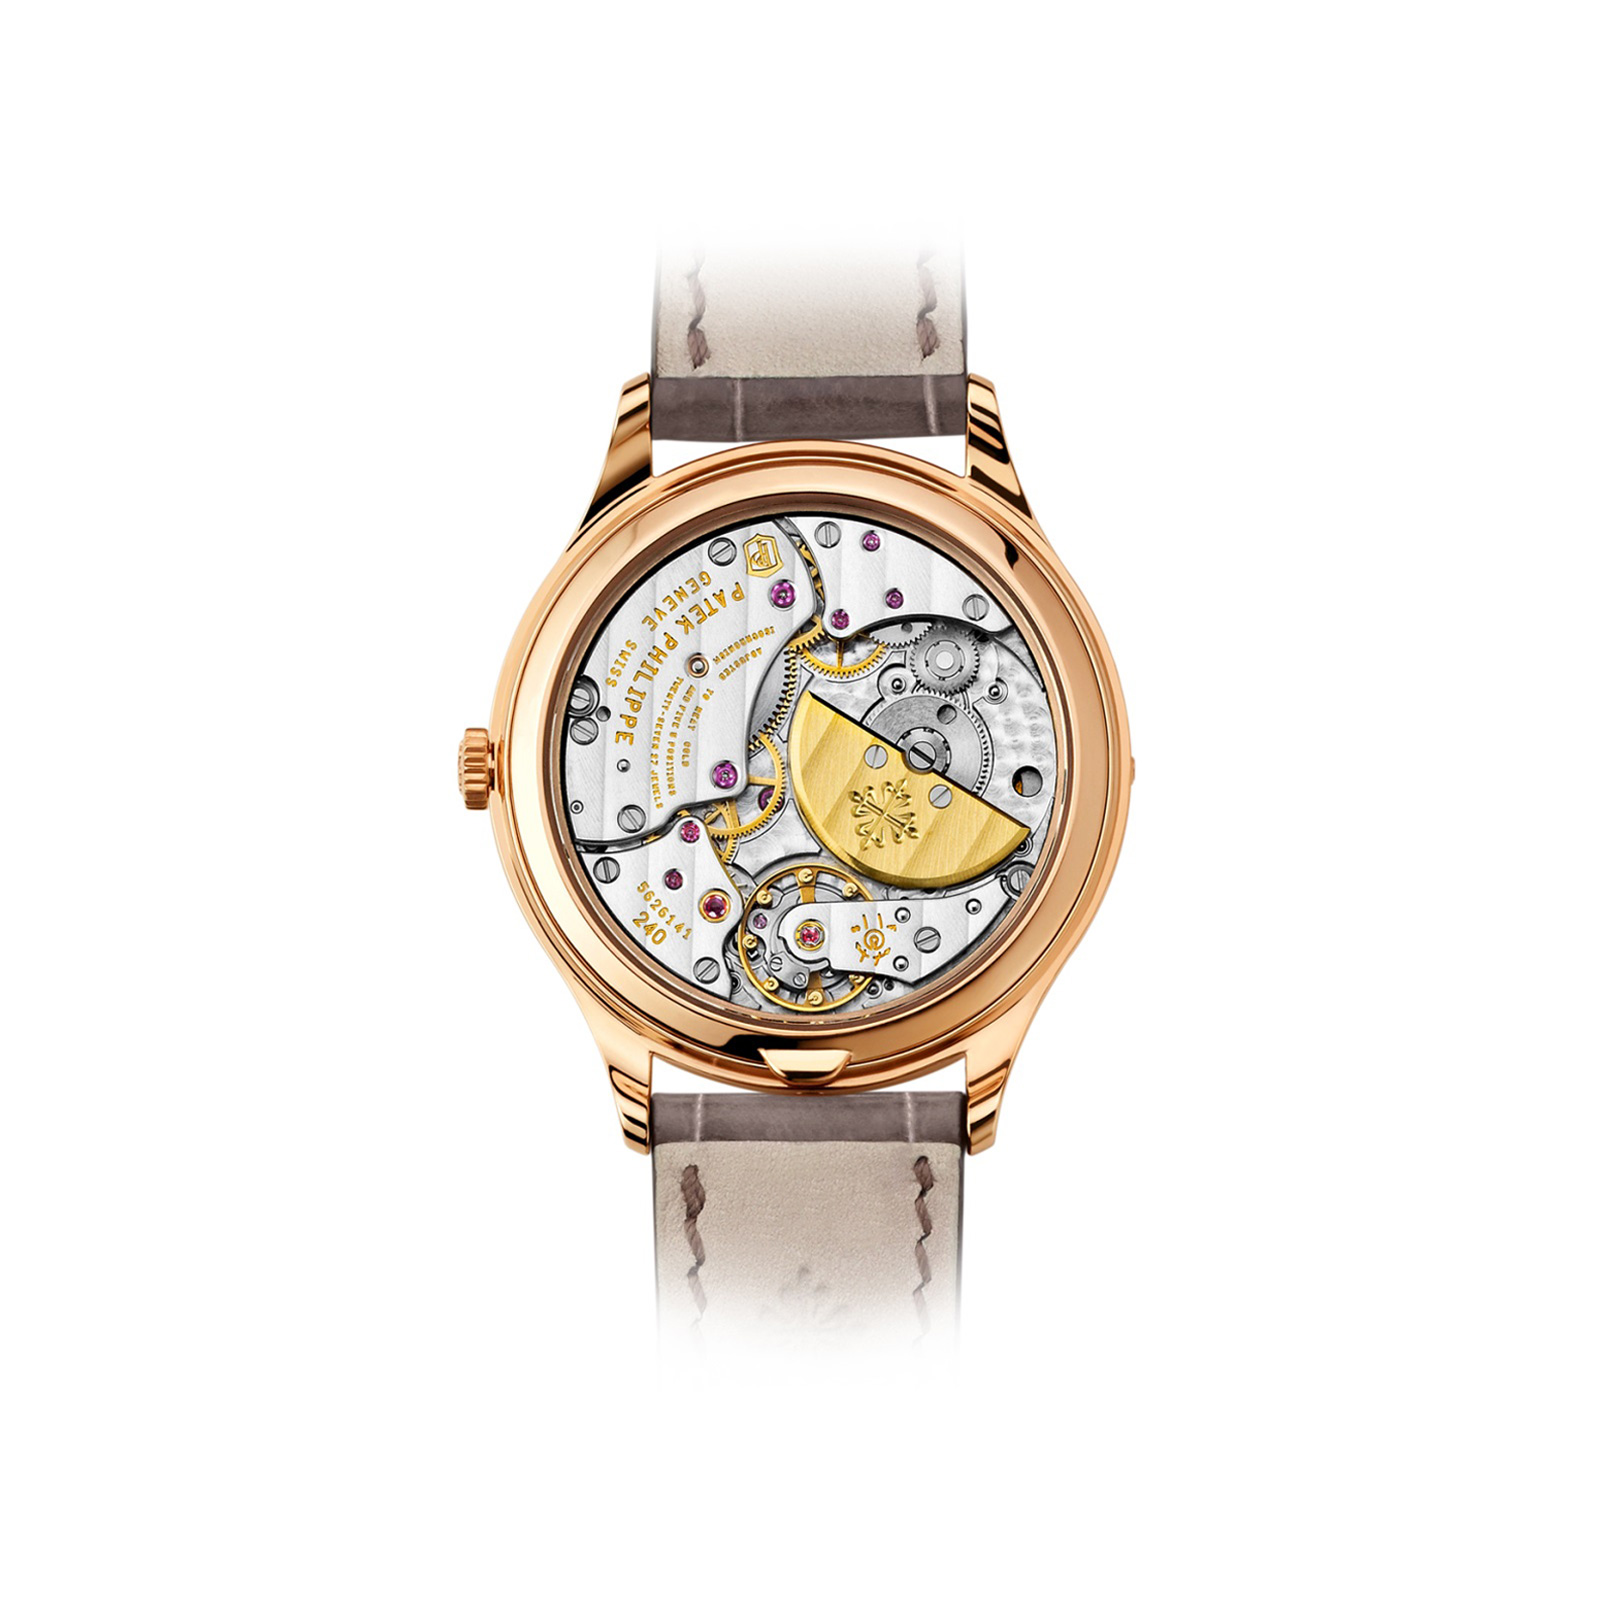 Grand Complications Rose Gold Ladies First Perpetual Calendar gallery 1